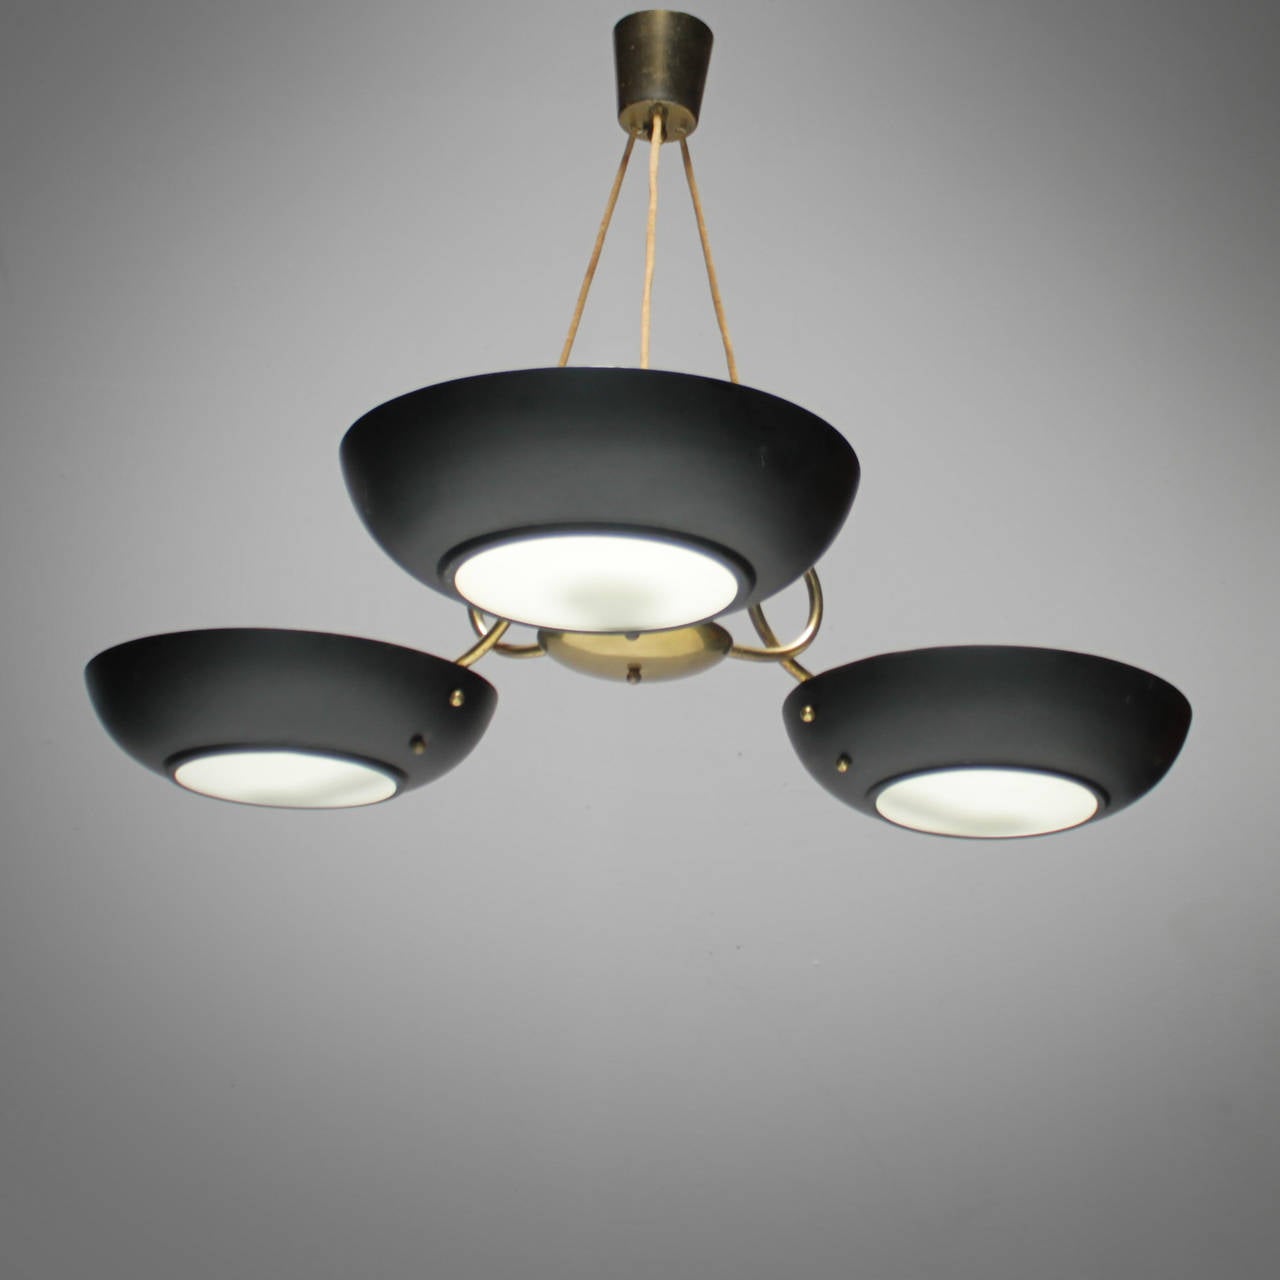 Large chandelier attributed by Louis Kalff for Philips from the fifties. Black lacquered metal, brass and glass. Rewiring is strongly recommended.
Measurements: from ceiling till drop: 20.8 in. (53 cm), total diameter: 30.3 in. (77 cm), diameter